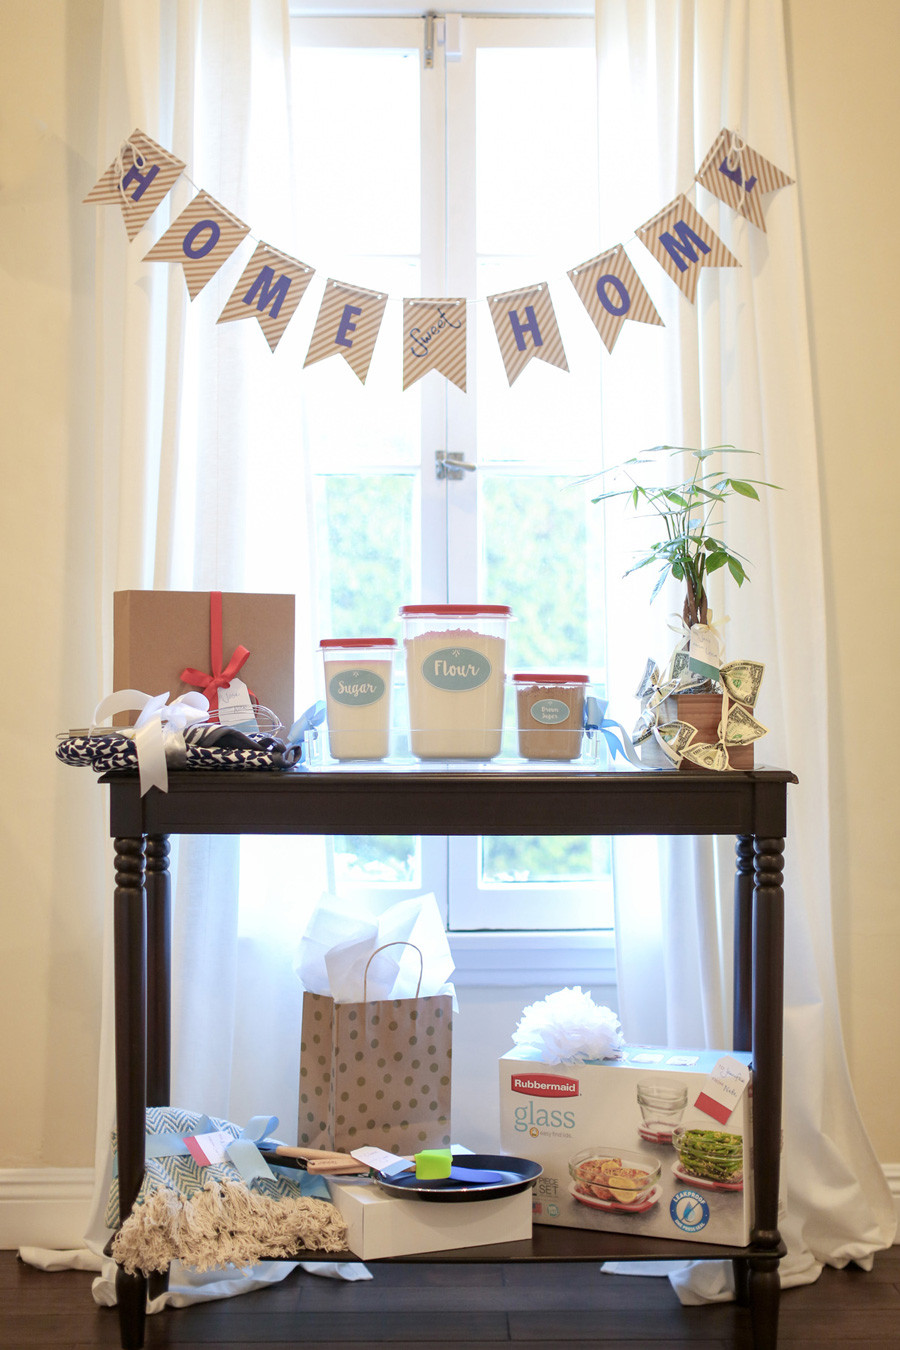 Summer Housewarming Party Ideas
 How To Throw A Great Housewarming Party